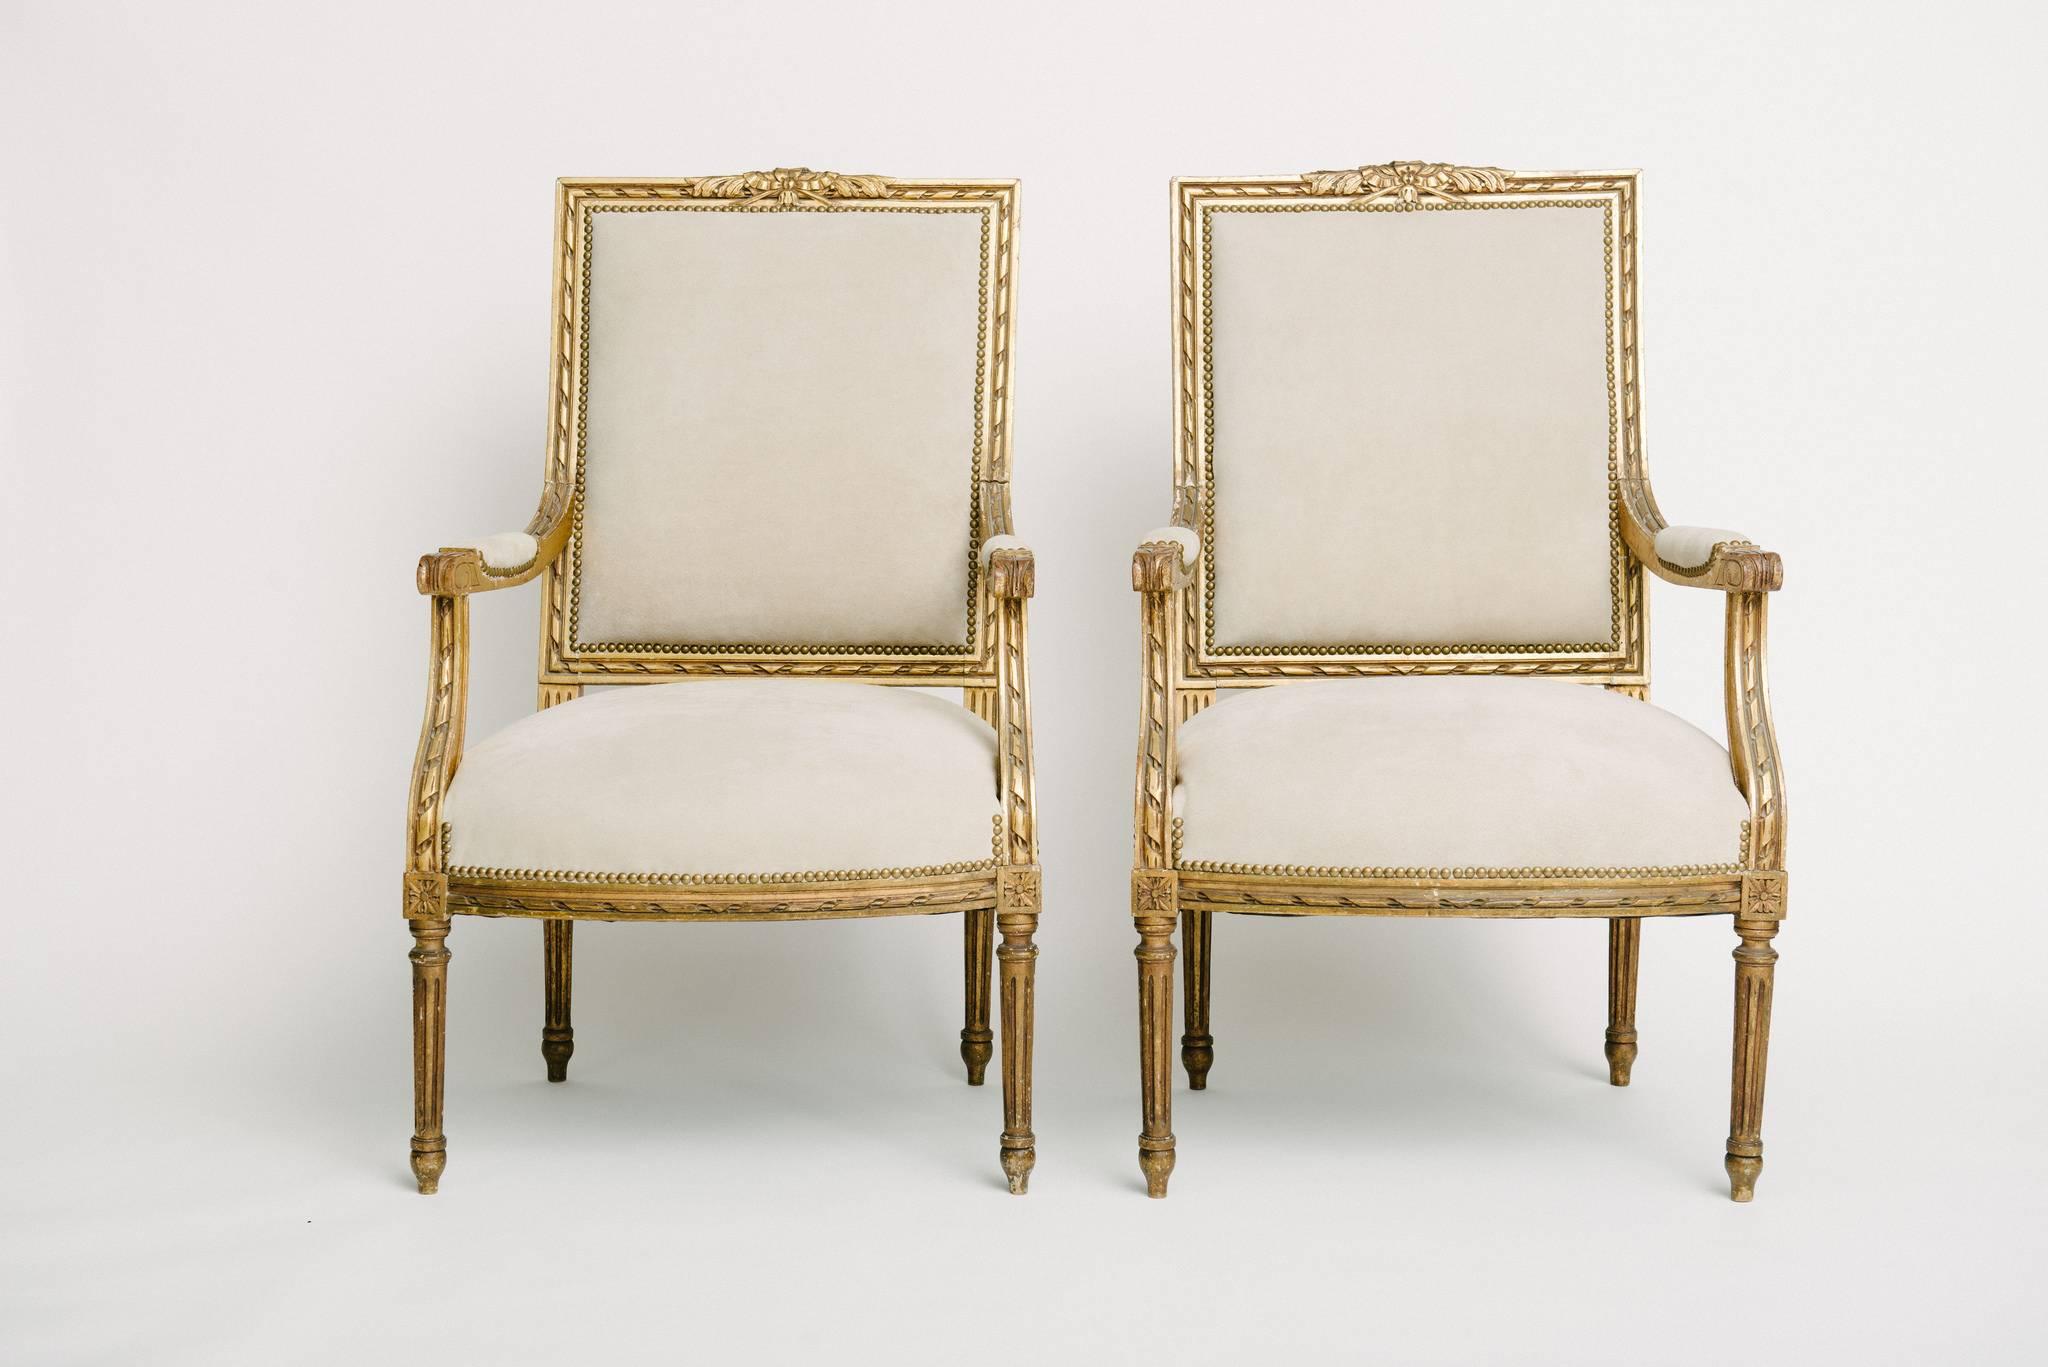 Pair of 19th century Louis XVI style giltwood armchairs newly upholstered in genuine bone colored suede.